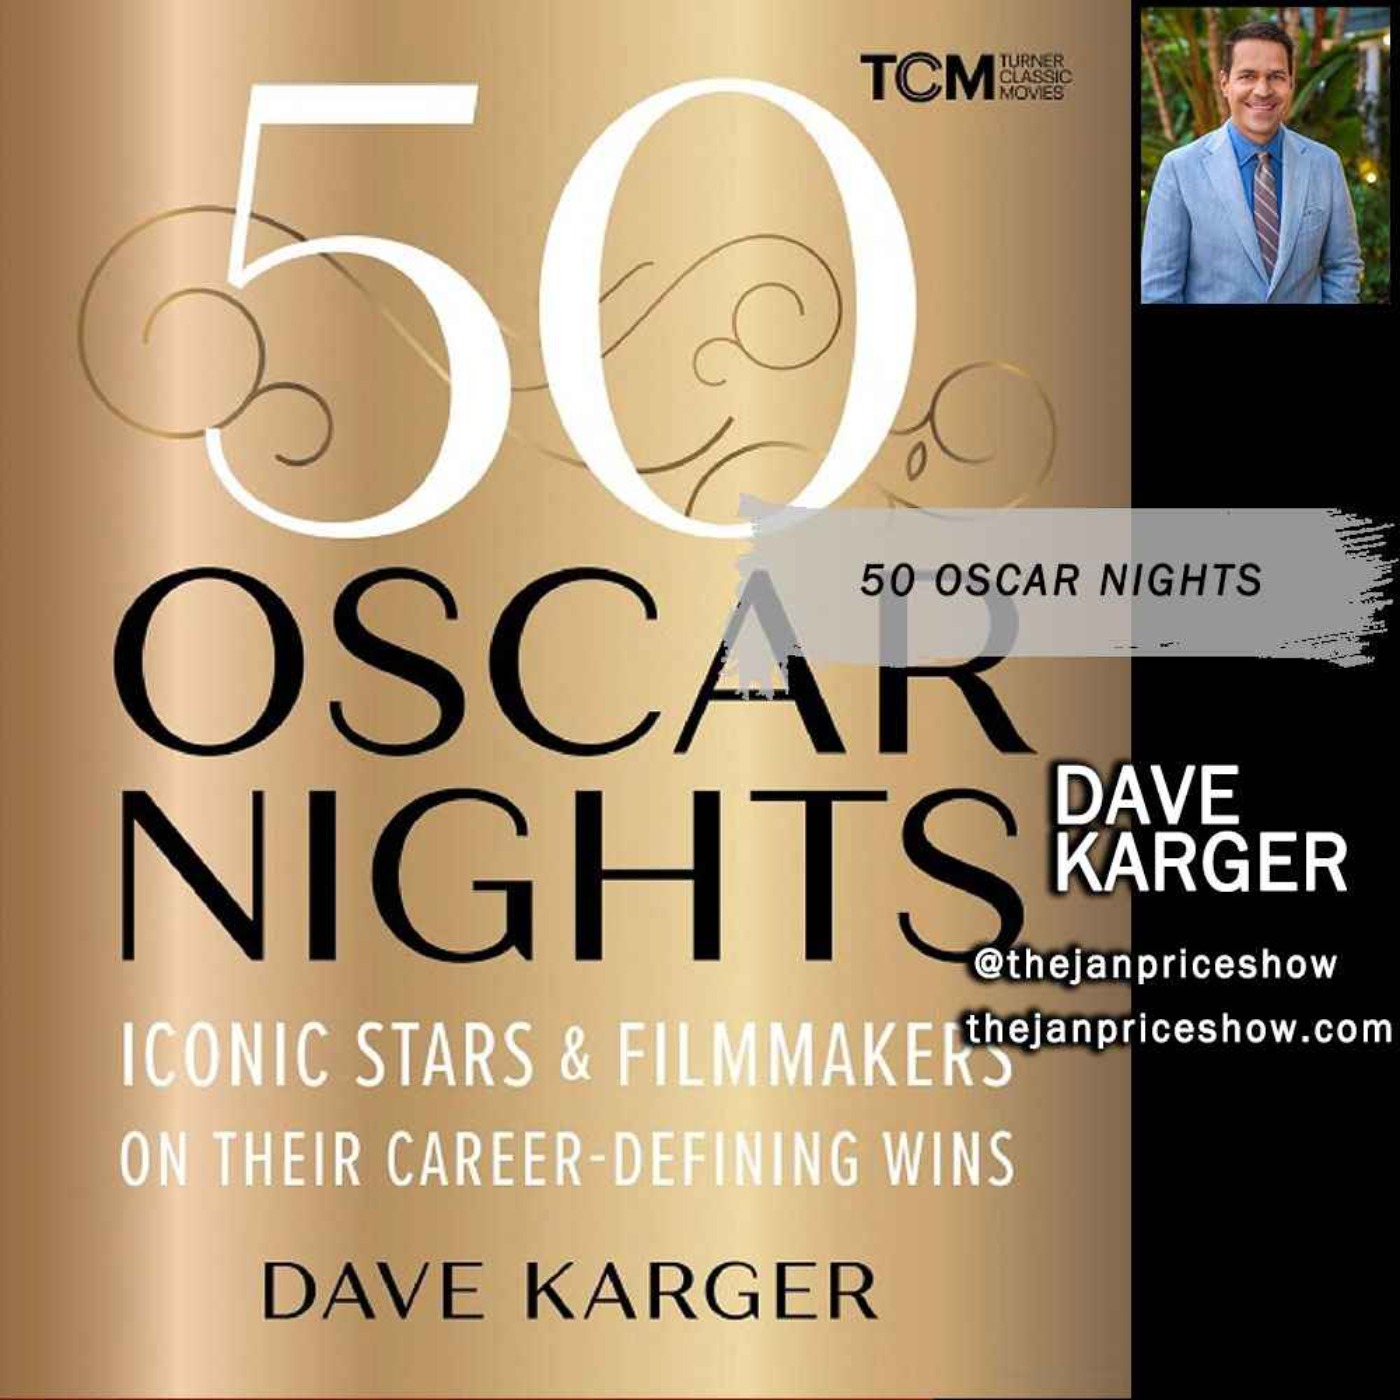 Dave Karger - 50 OSCAR NIGHTS: Iconic Stars & Filmmakers on Their Career-Defining Wins